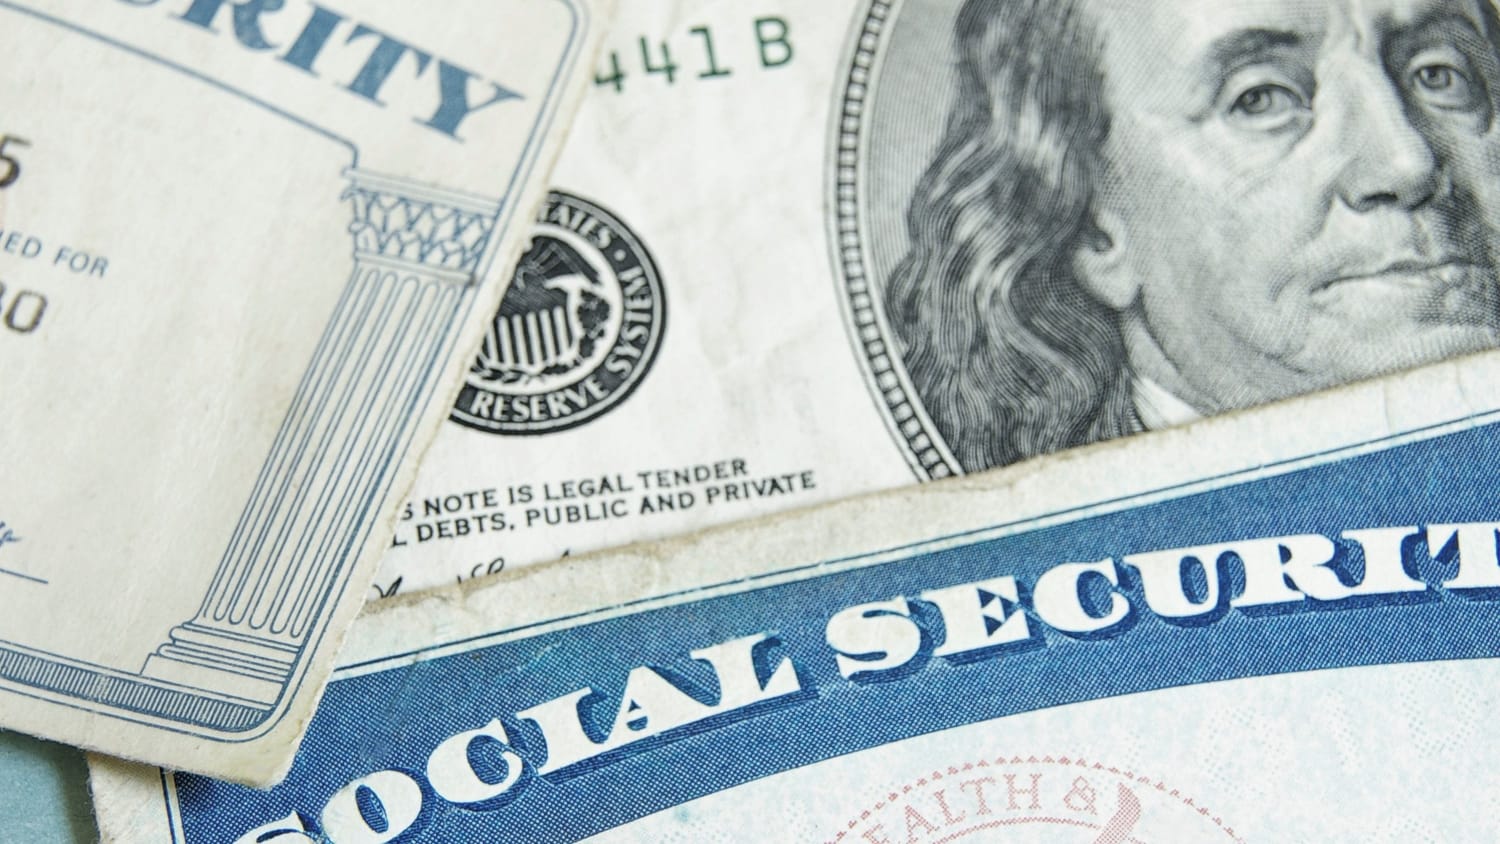 Maximize your Social Security checks by doing these 4 things